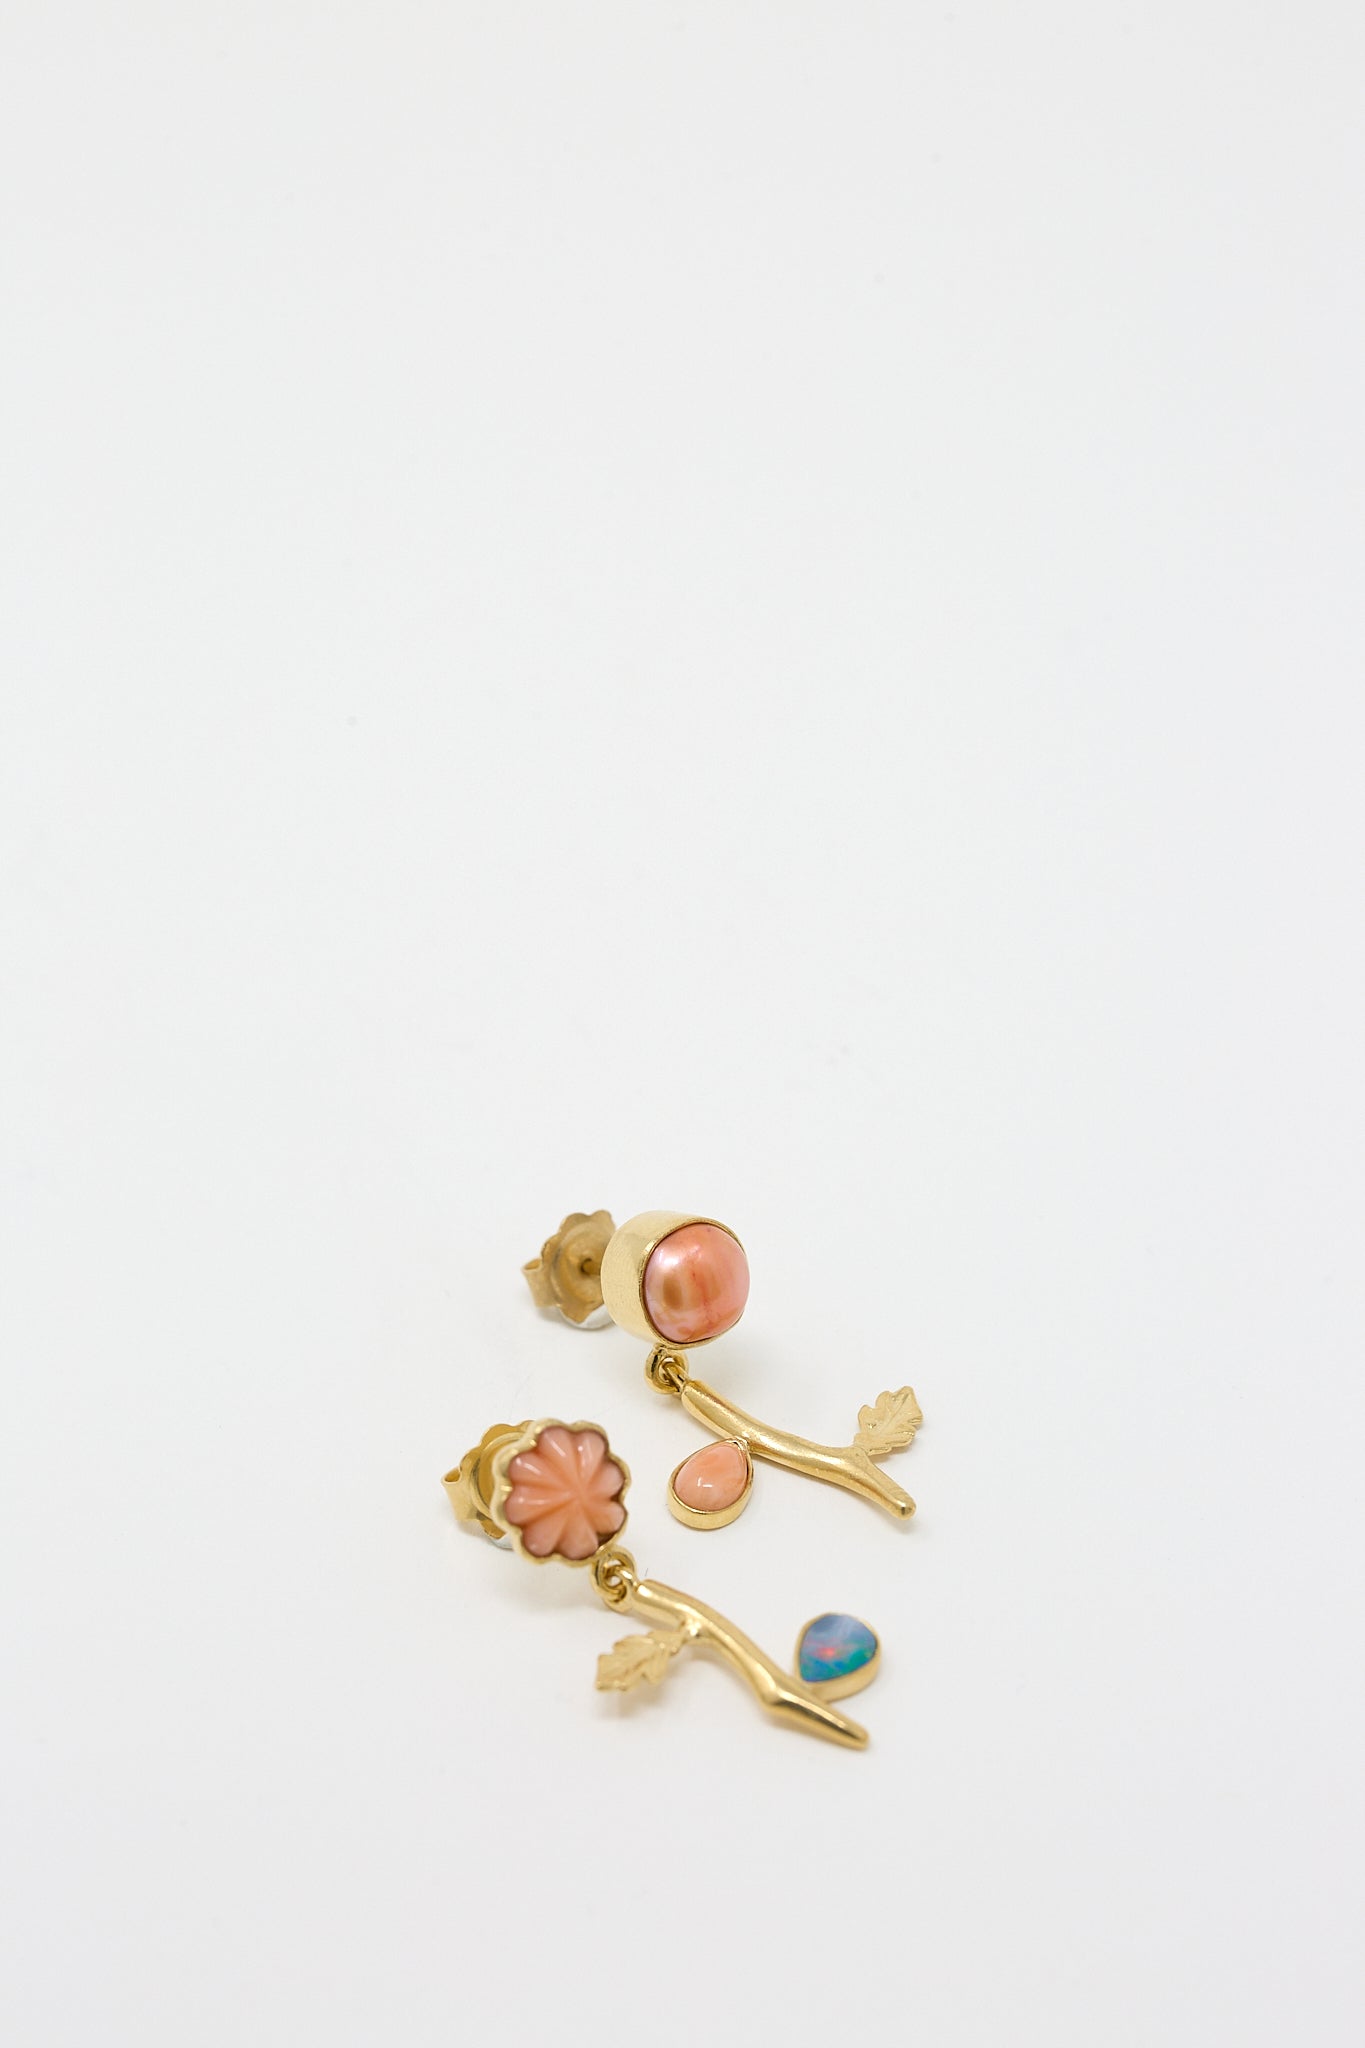 A pair of Grainne Morton Flower Drop Earrings in 18K gold-plated silver with coral and pearls.